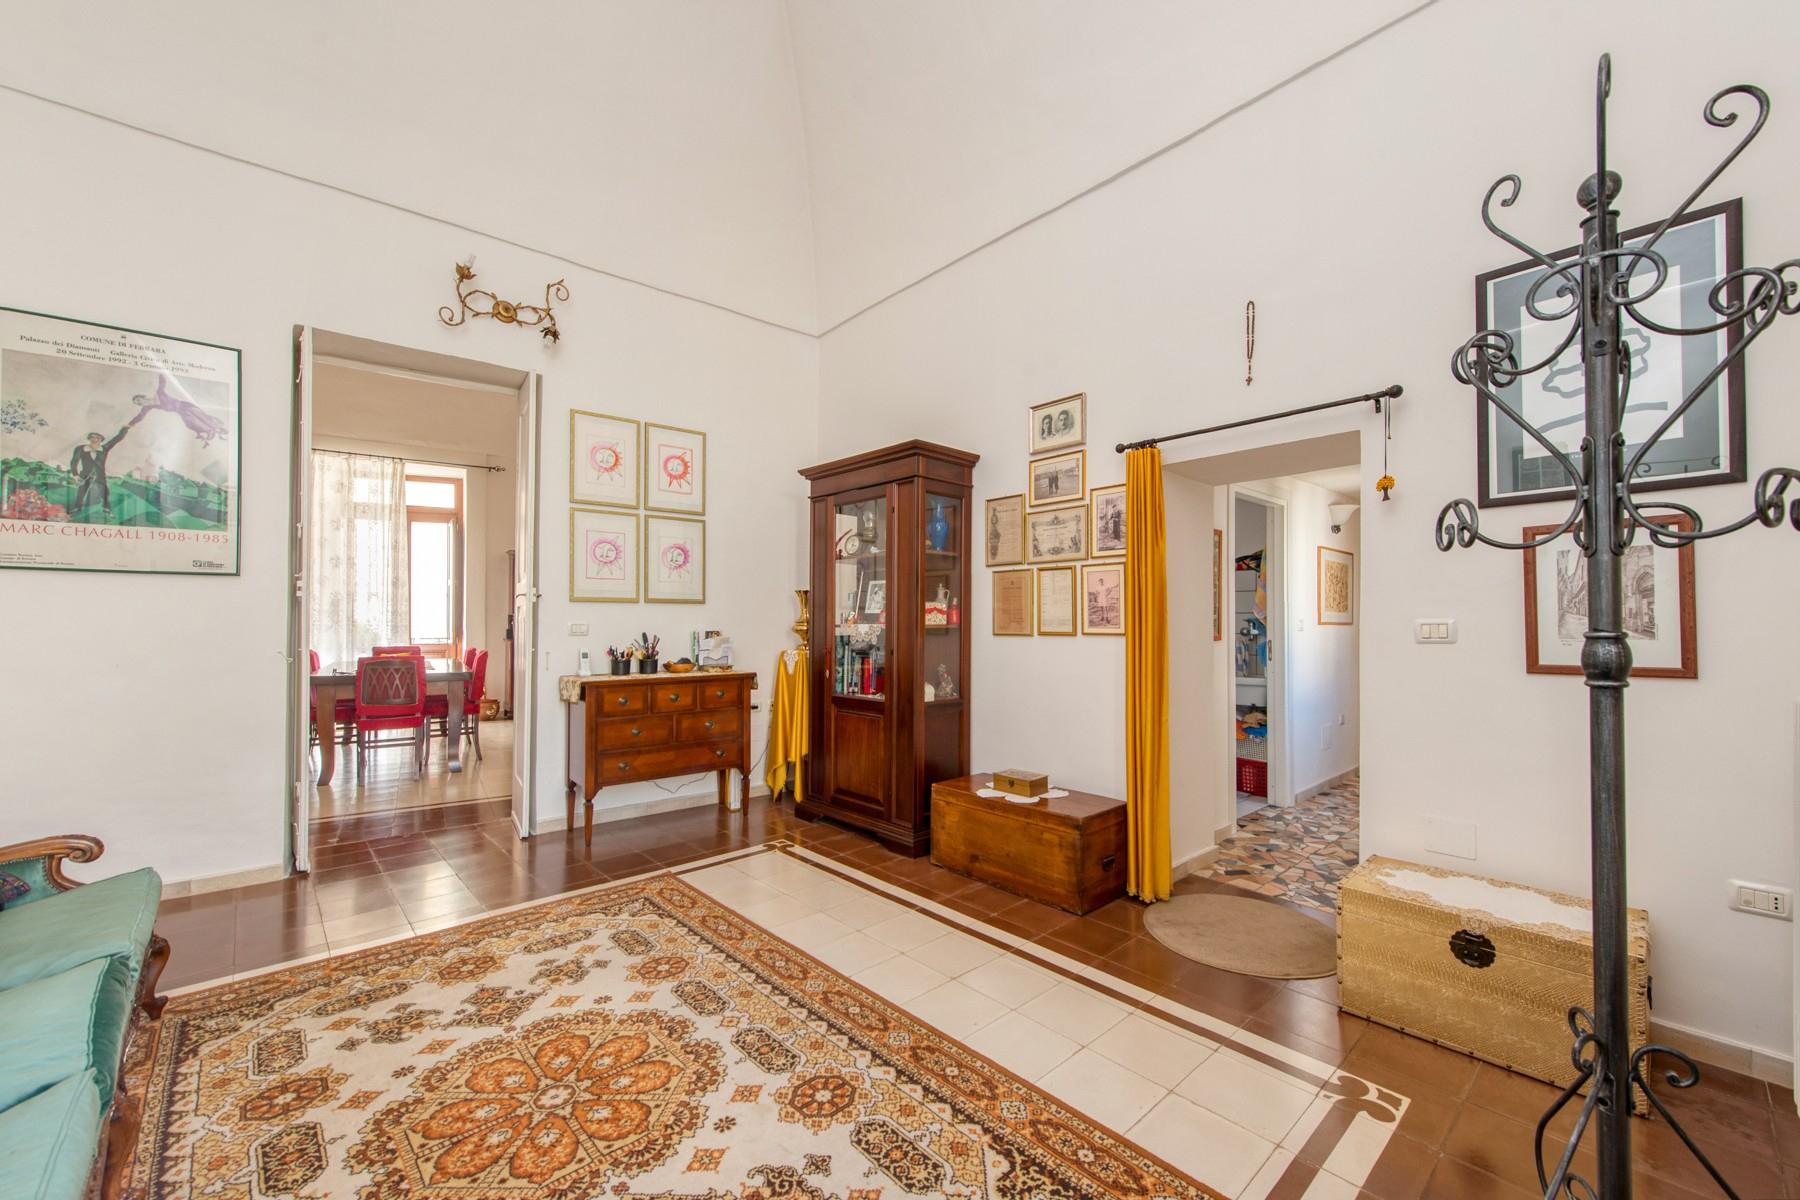 Perfectly renovated Palazzetto in the historic center of Parabita - 7